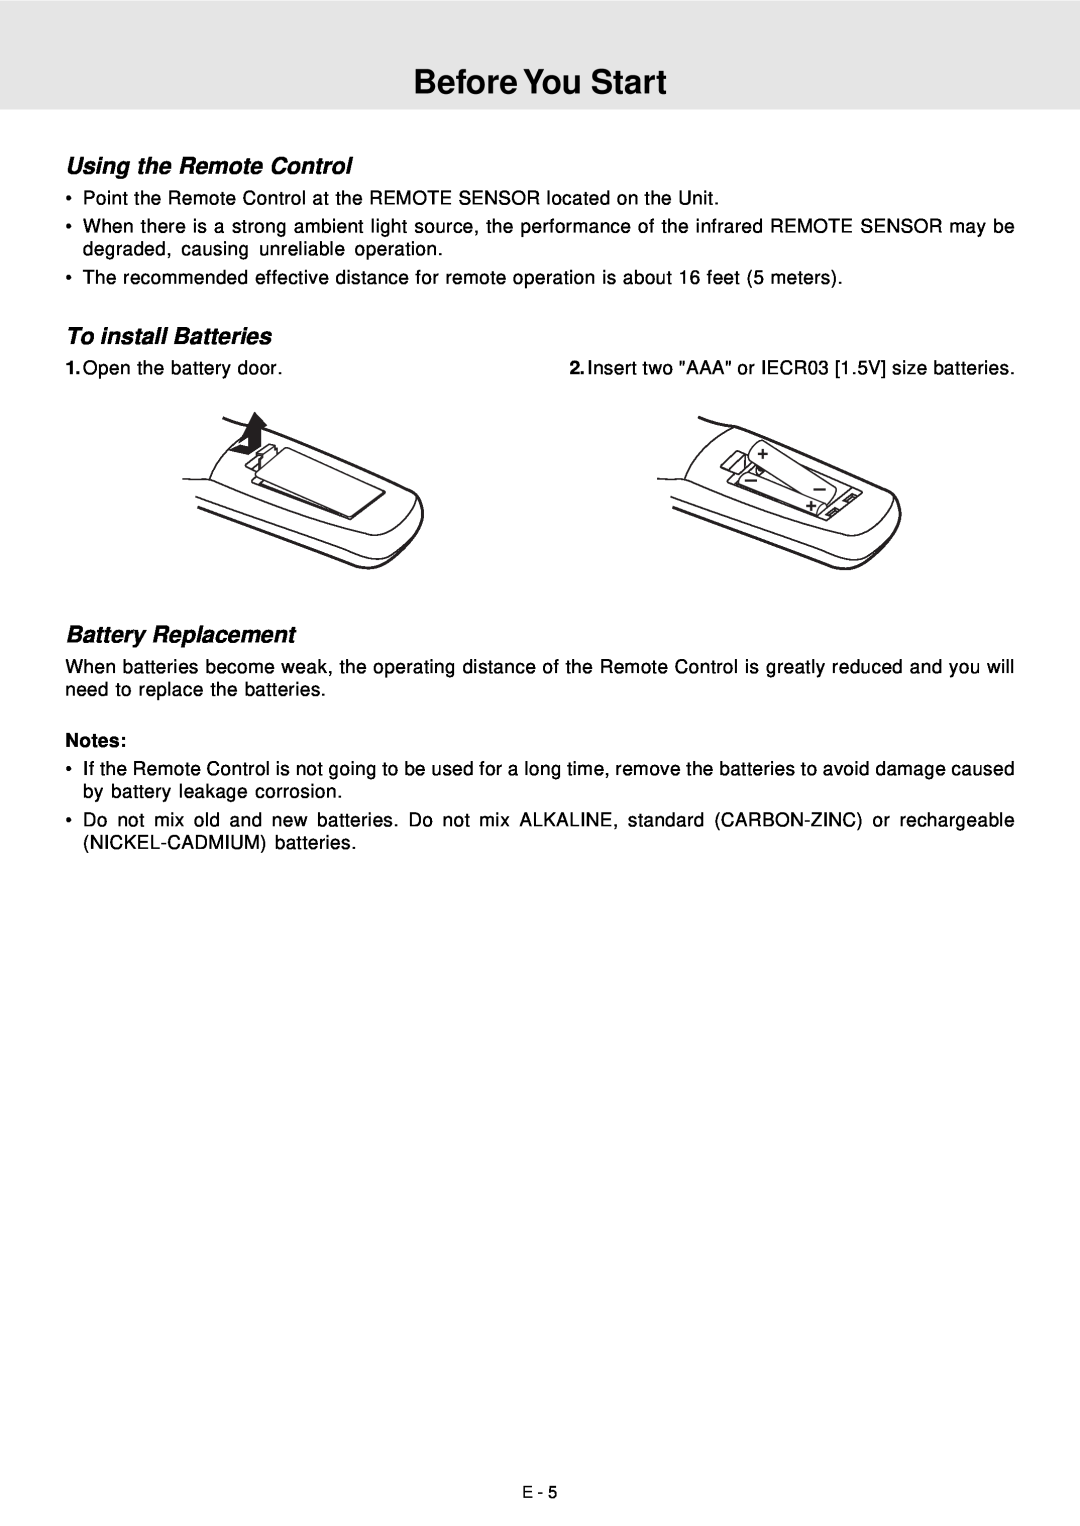 Venturer STS91 manual Before You Start, Using the Remote Control, To install Batteries, Battery Replacement 